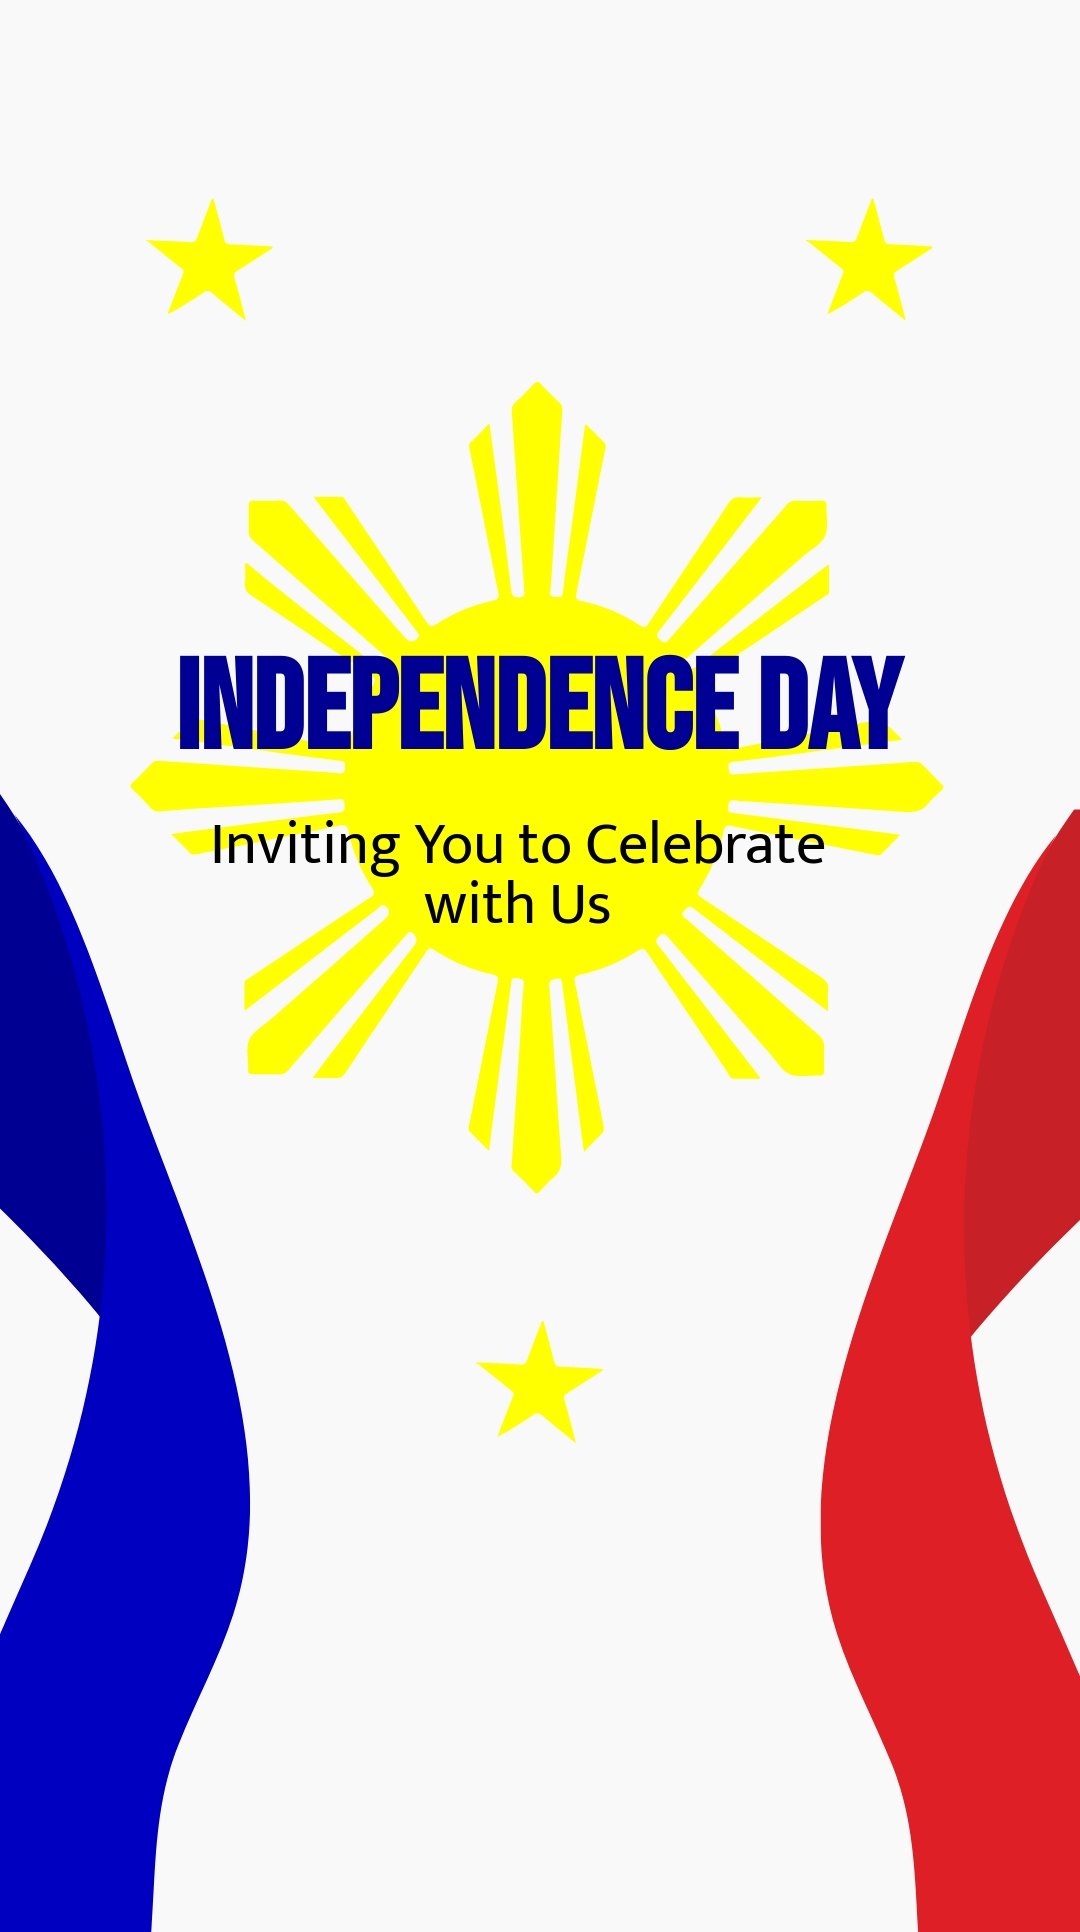 Philippines Independence Day Invitation Whatsapp Post Template.jpe